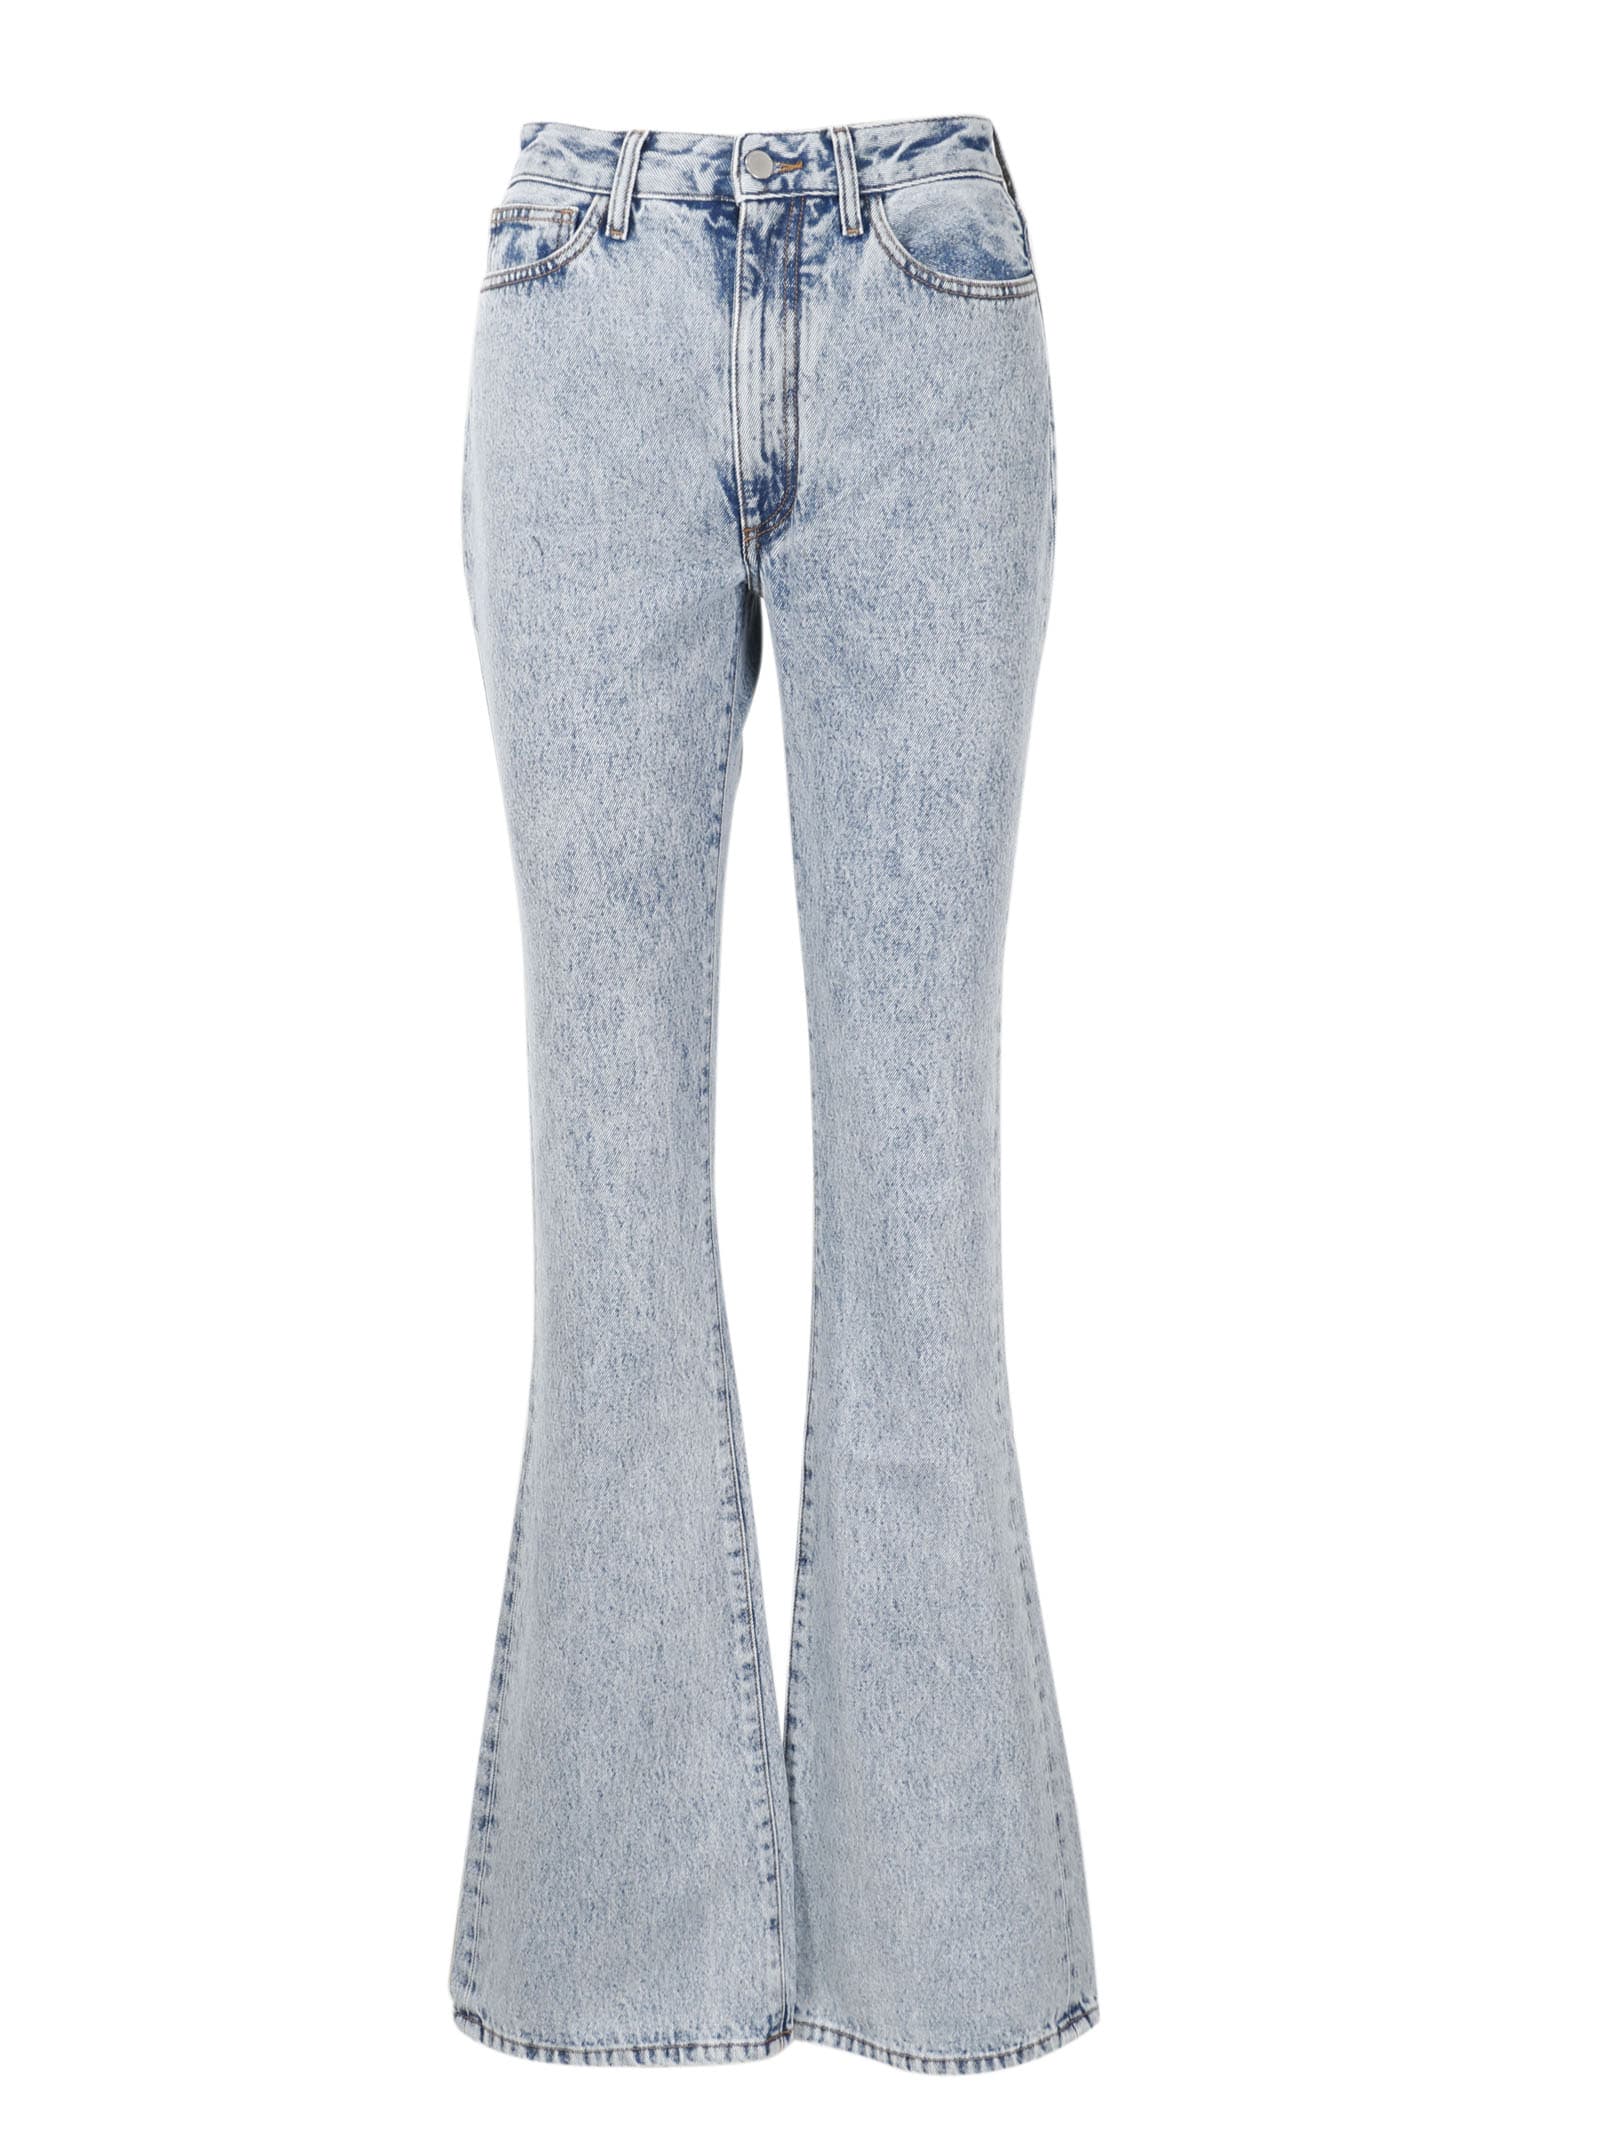 Alessandra Rich High Waisted Flared Jeans